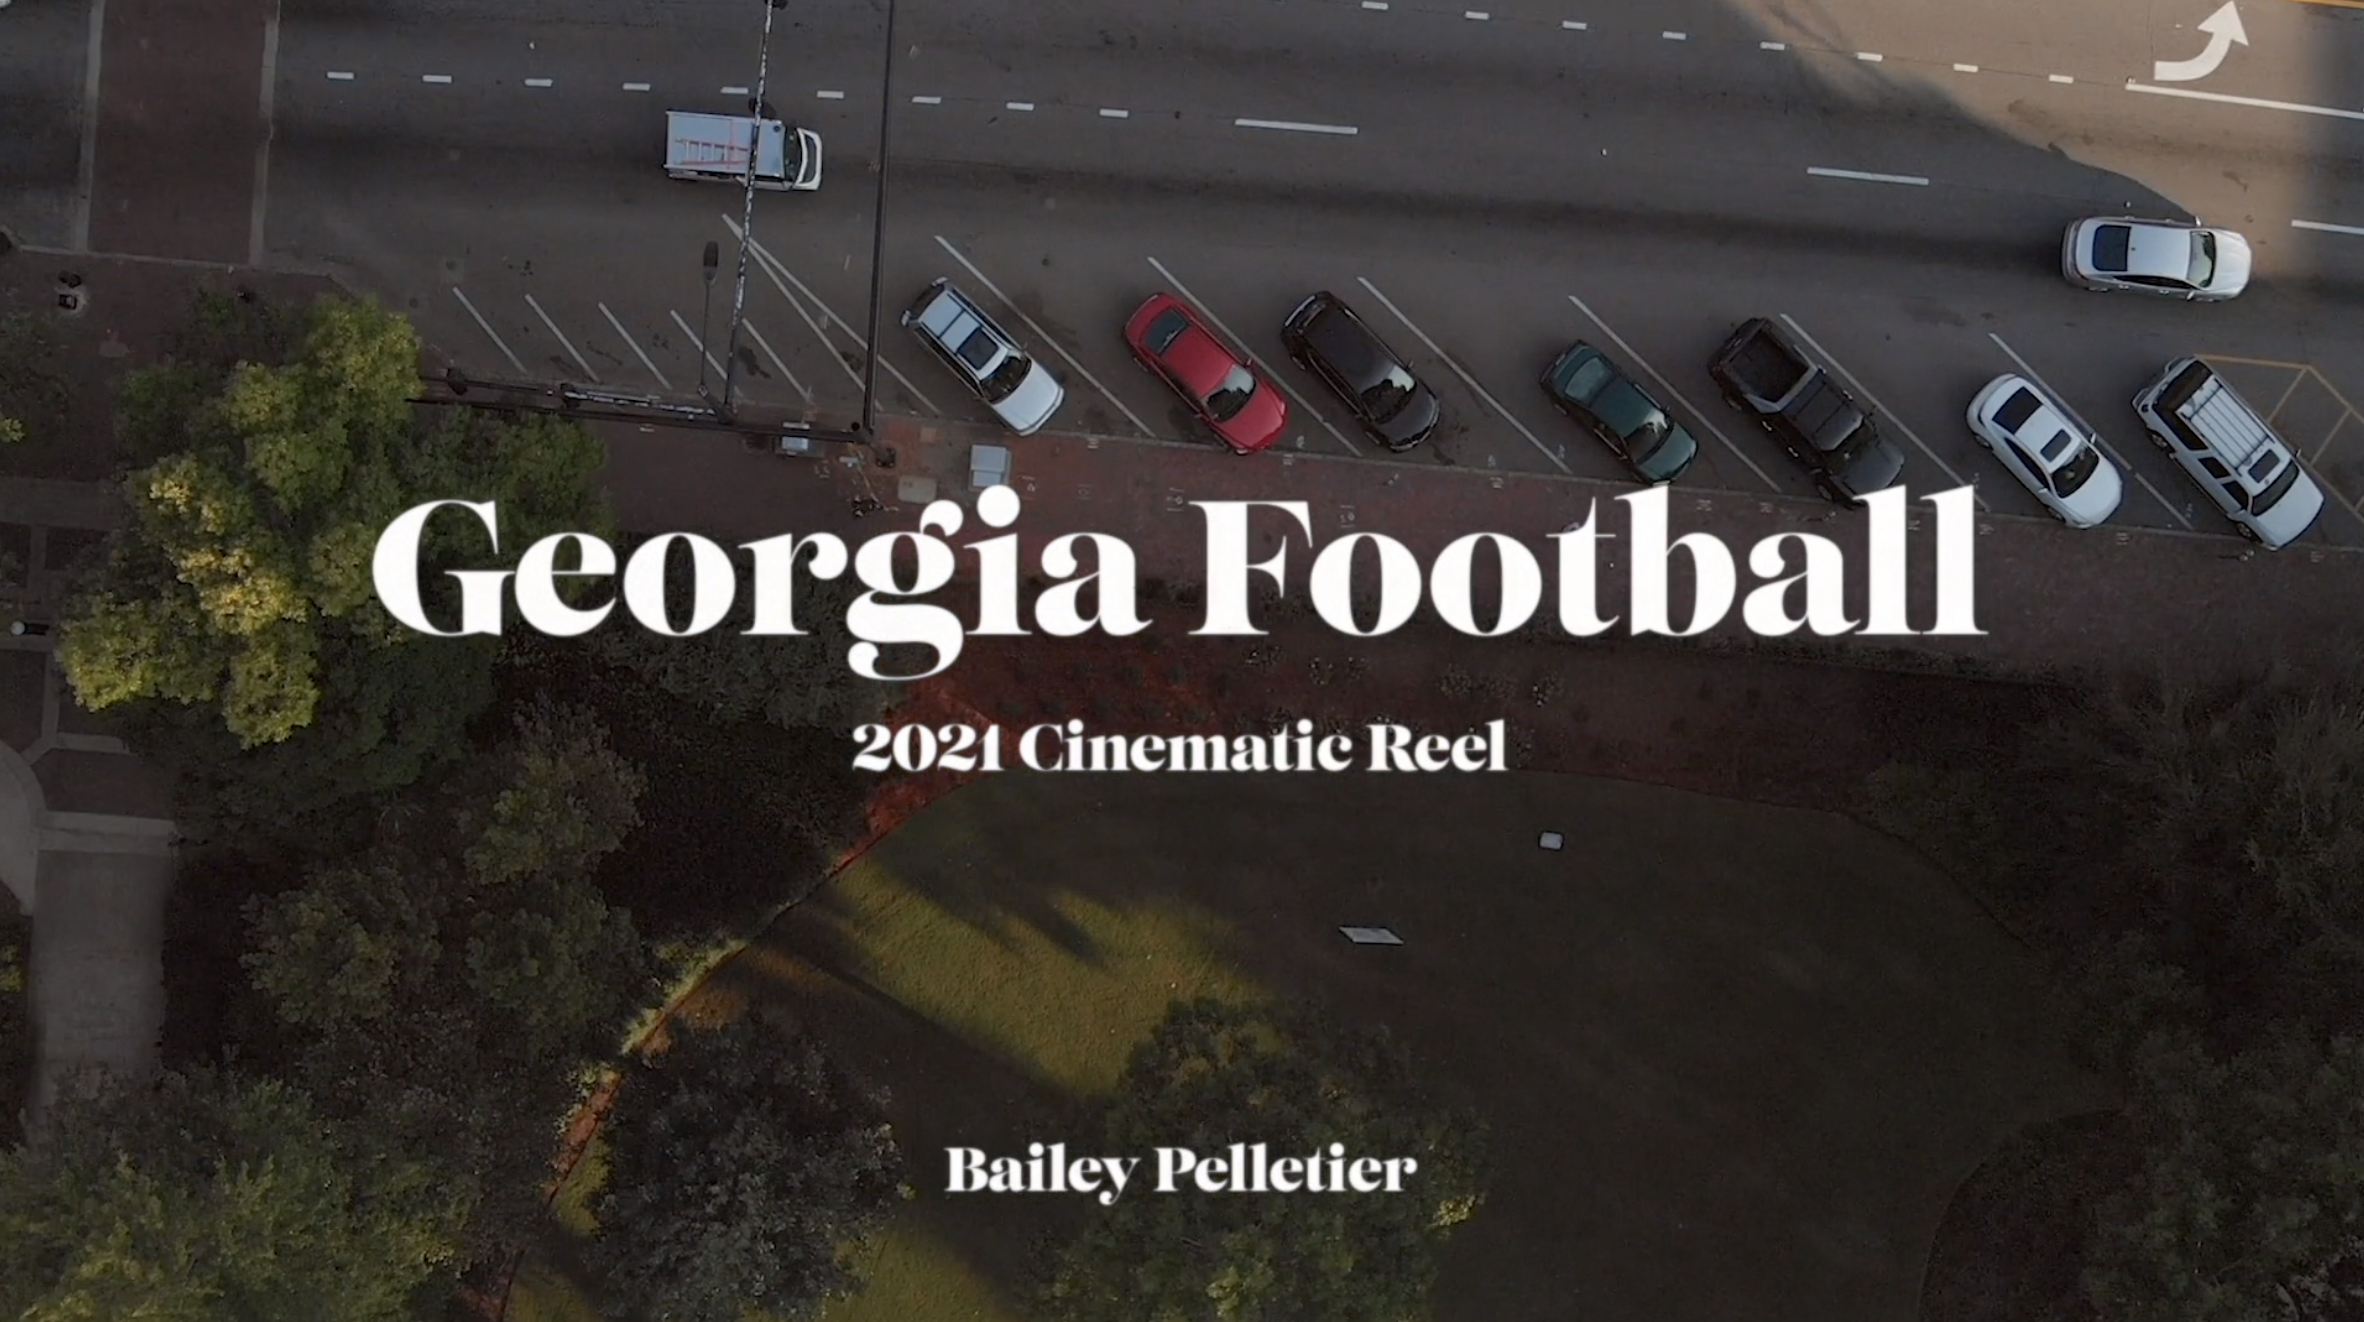 Thumbnail from the 2021 Cinematic Georgia Football Reel